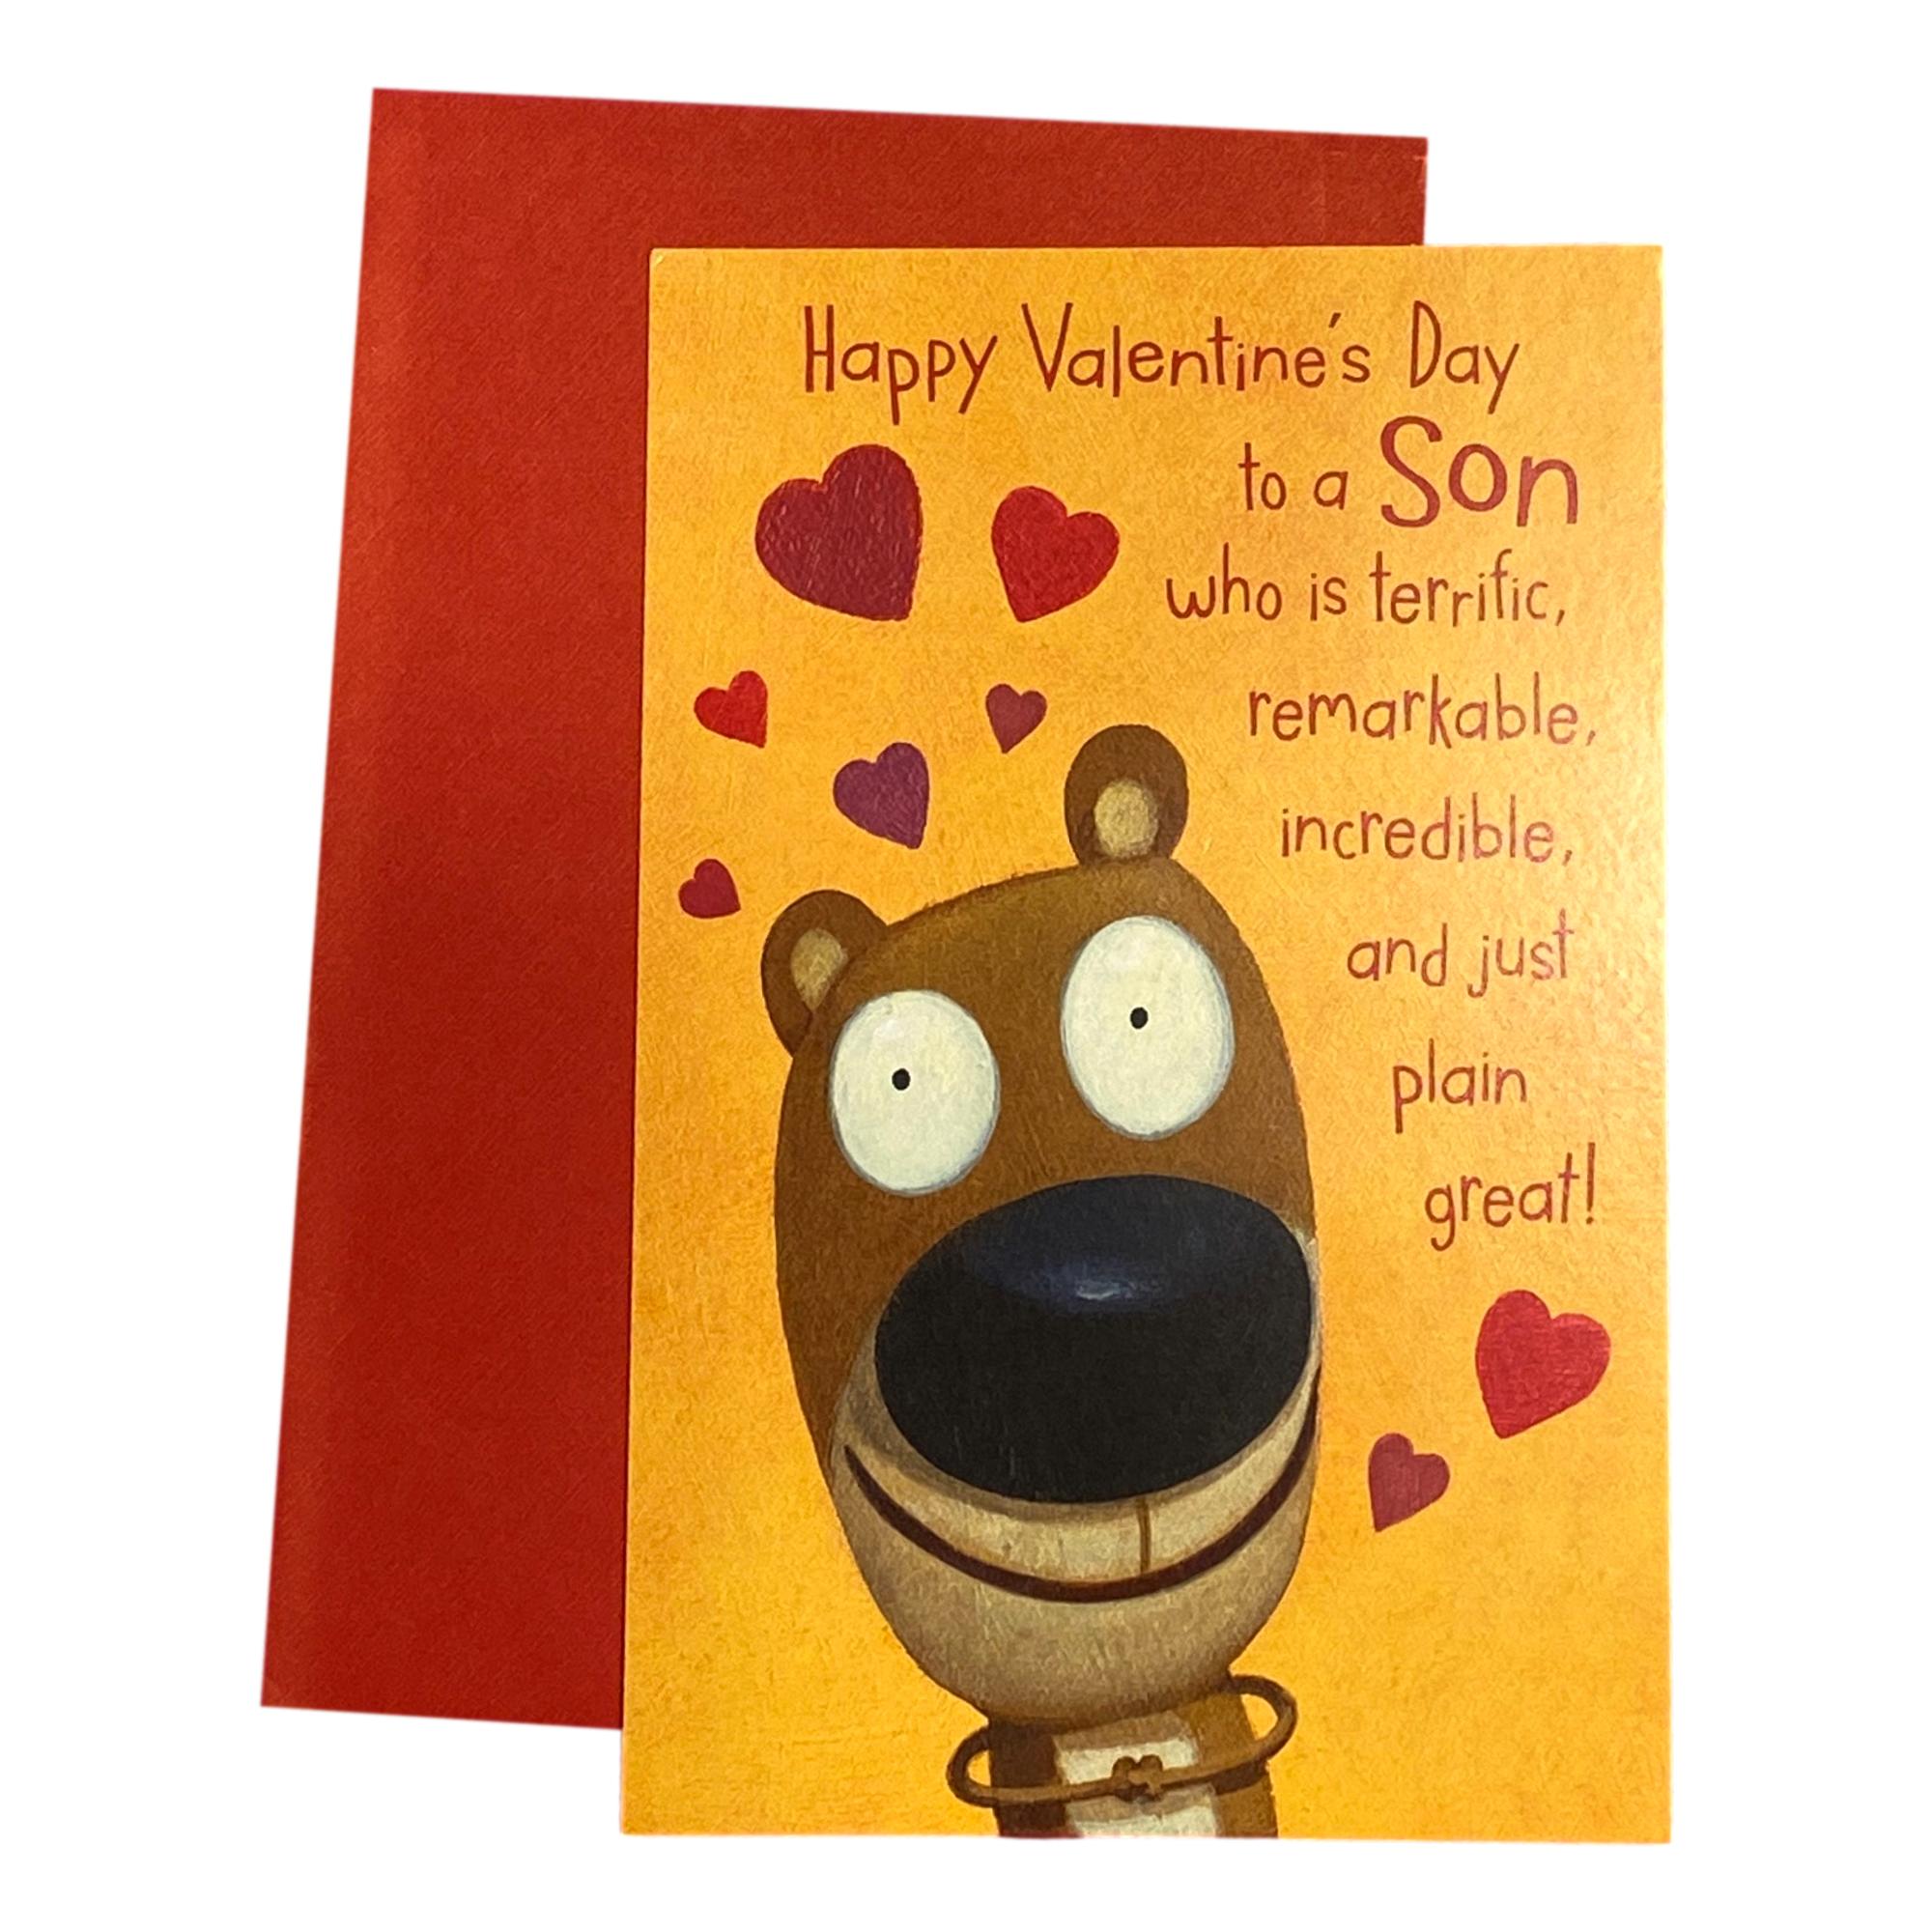 Happy Valentine Images 2022 to a Son